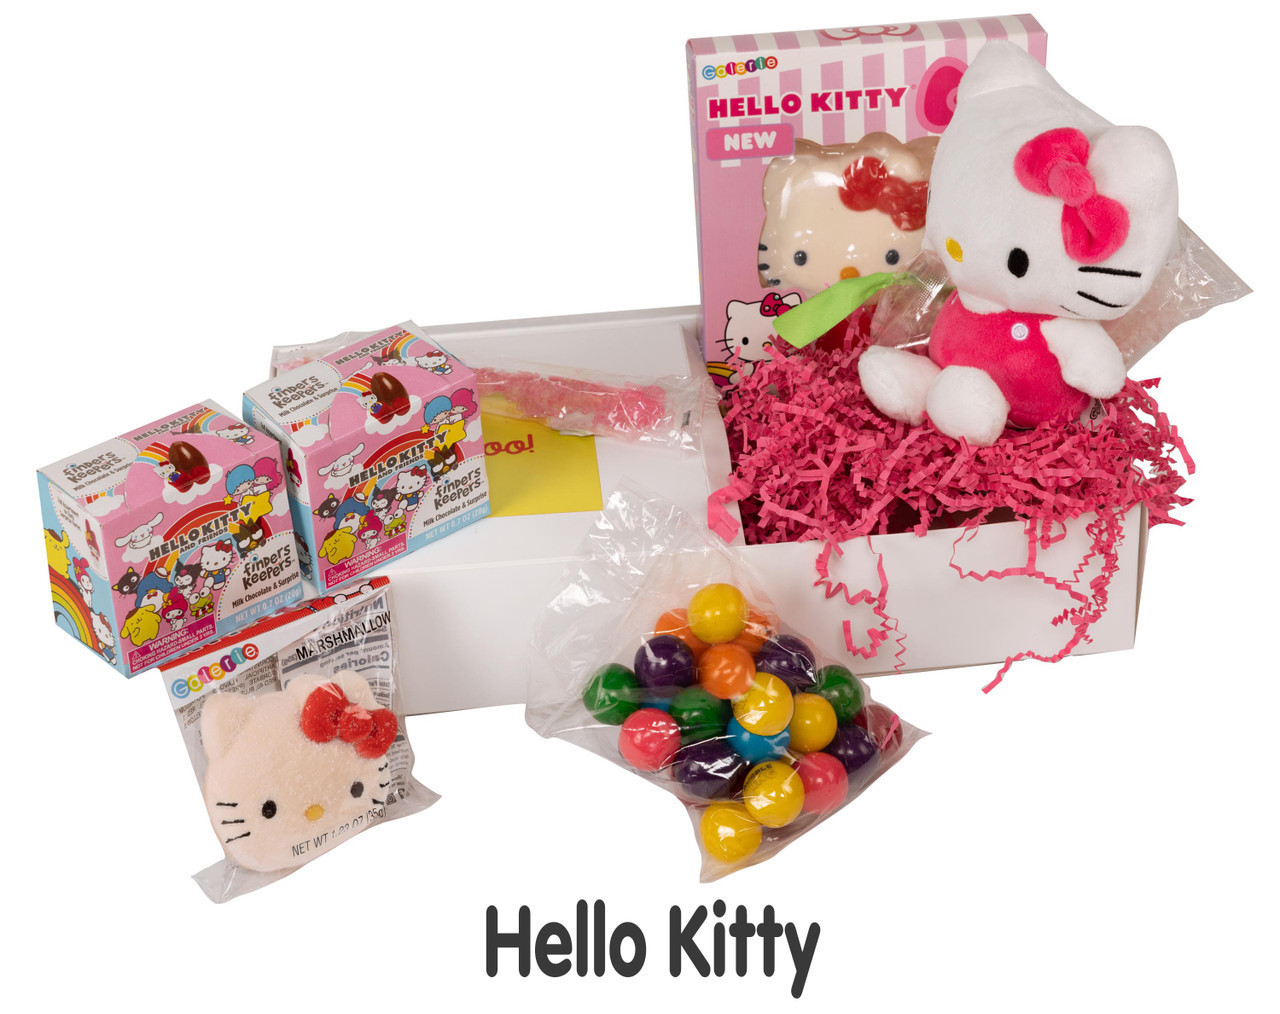 Galerie Hello Kitty and Friends Finders Keepers with Milk Chocolate and  Surprise, 0.7 oz